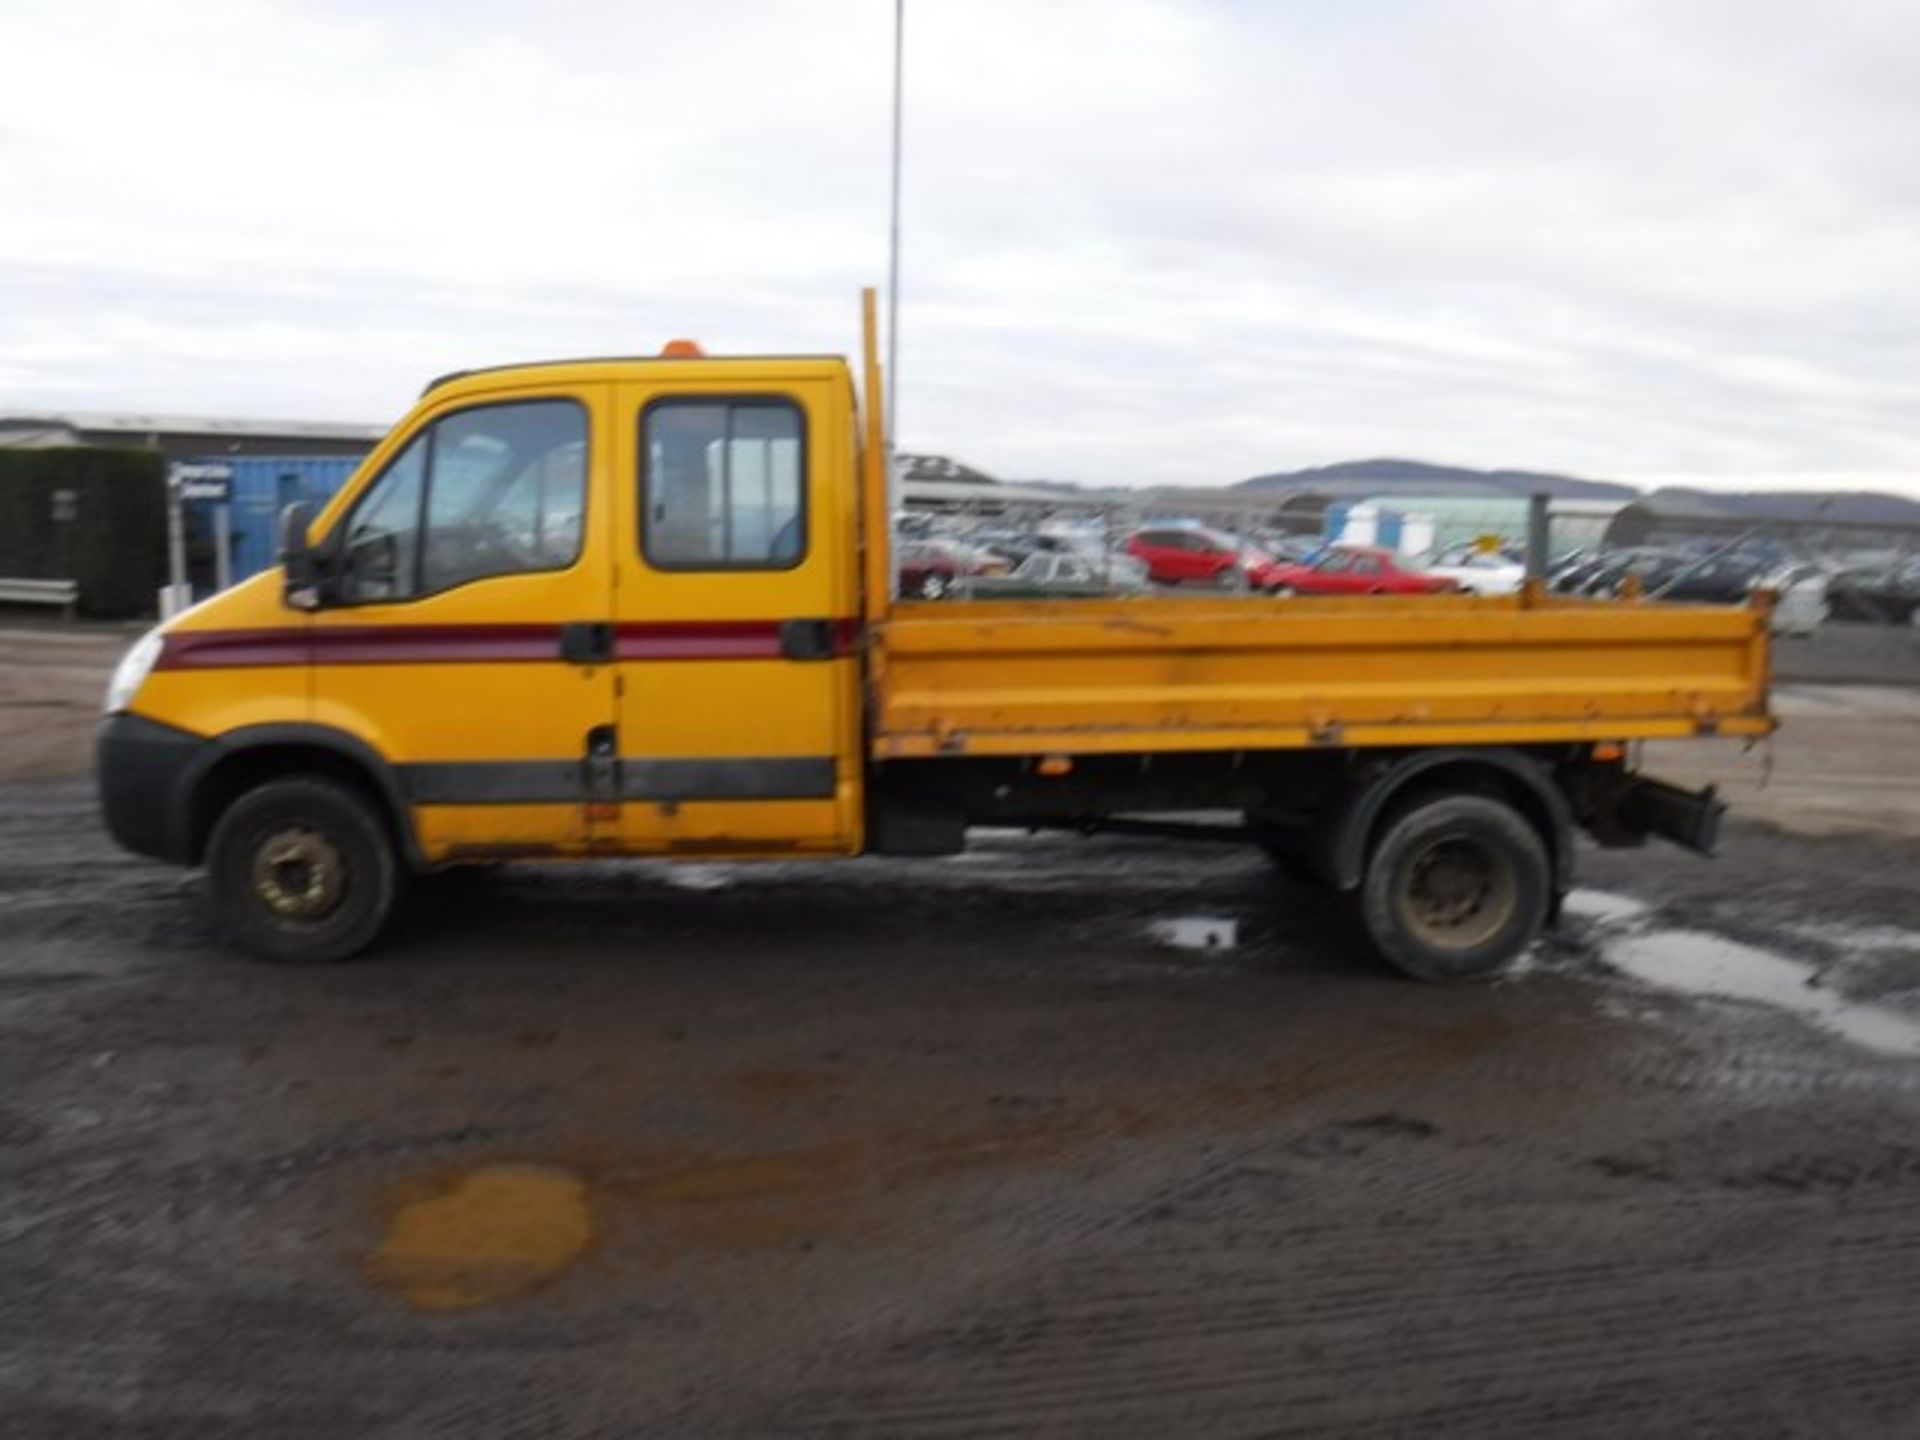 IVECO DAILY 65C18 - 2998cc - Image 5 of 11